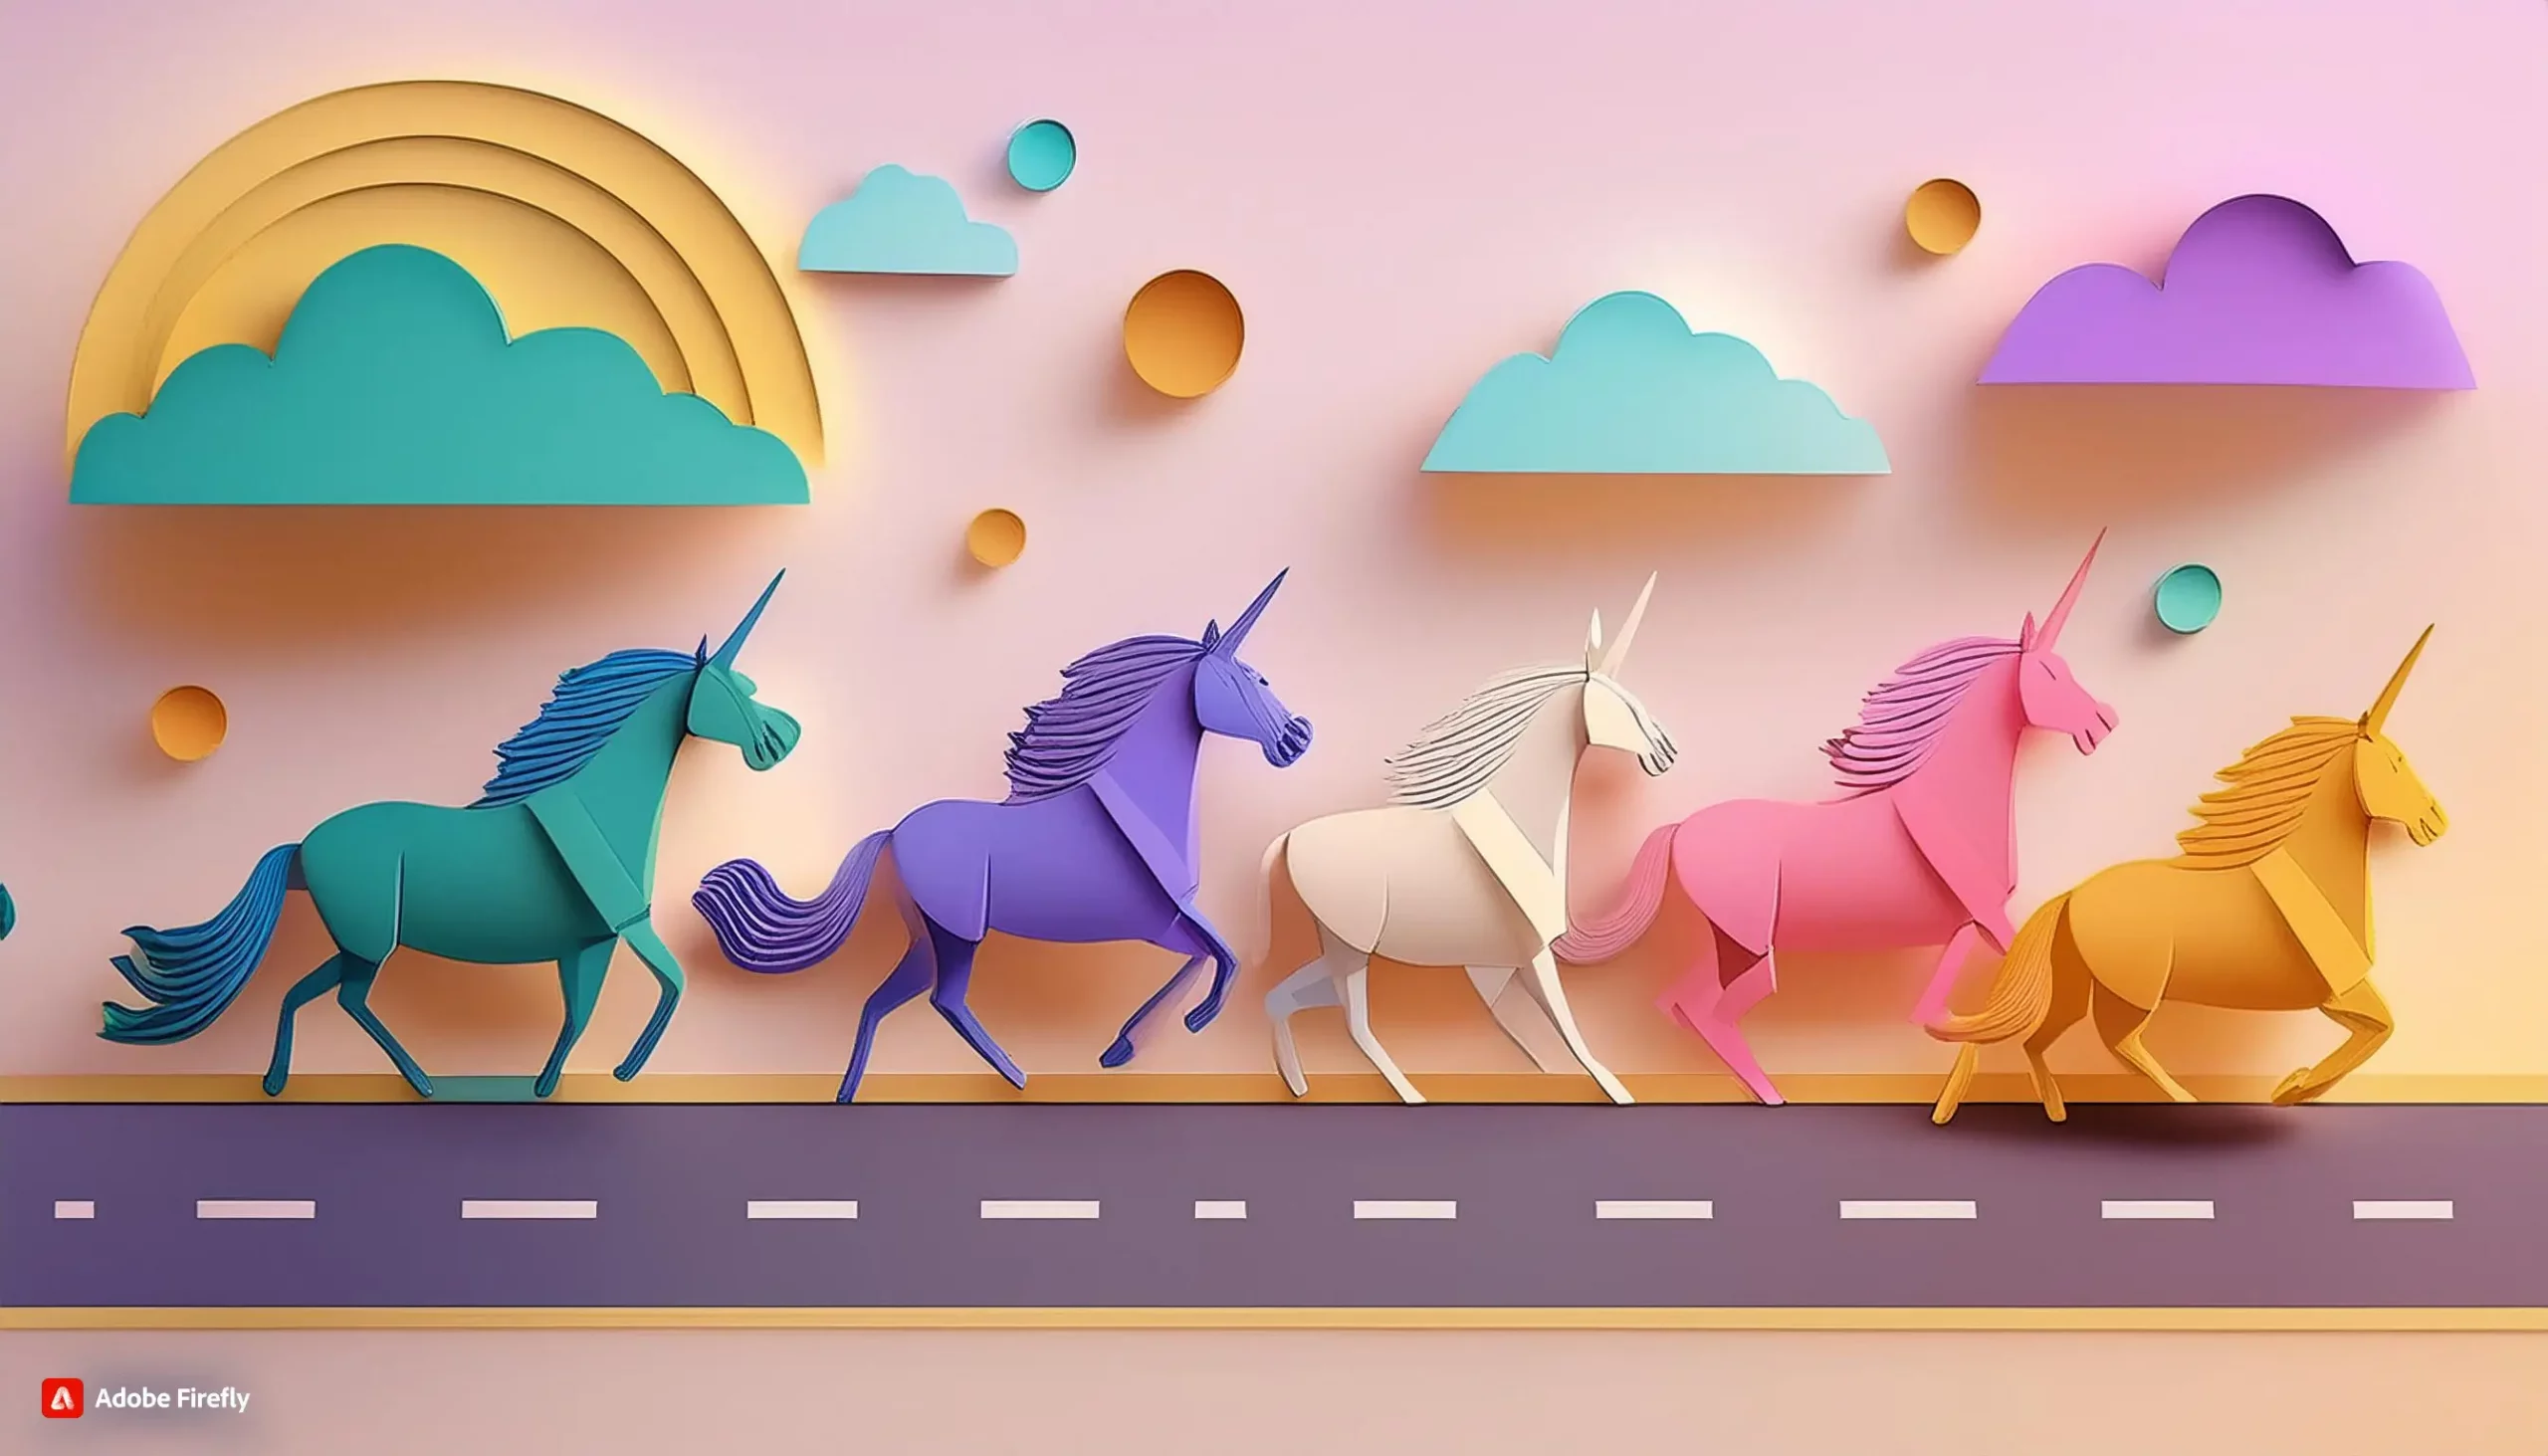 An illustration representing new unicorn car brands in a whimsical, paper-cut style. Five unicorns, symbolizing the innovative car brands Rivian, Lucid Motors, NIO, and Fisker Inc., run along a road under a pastel-colored sky with clouds and a rainbow, highlighting the excitement and vibrant future of the automotive industry.